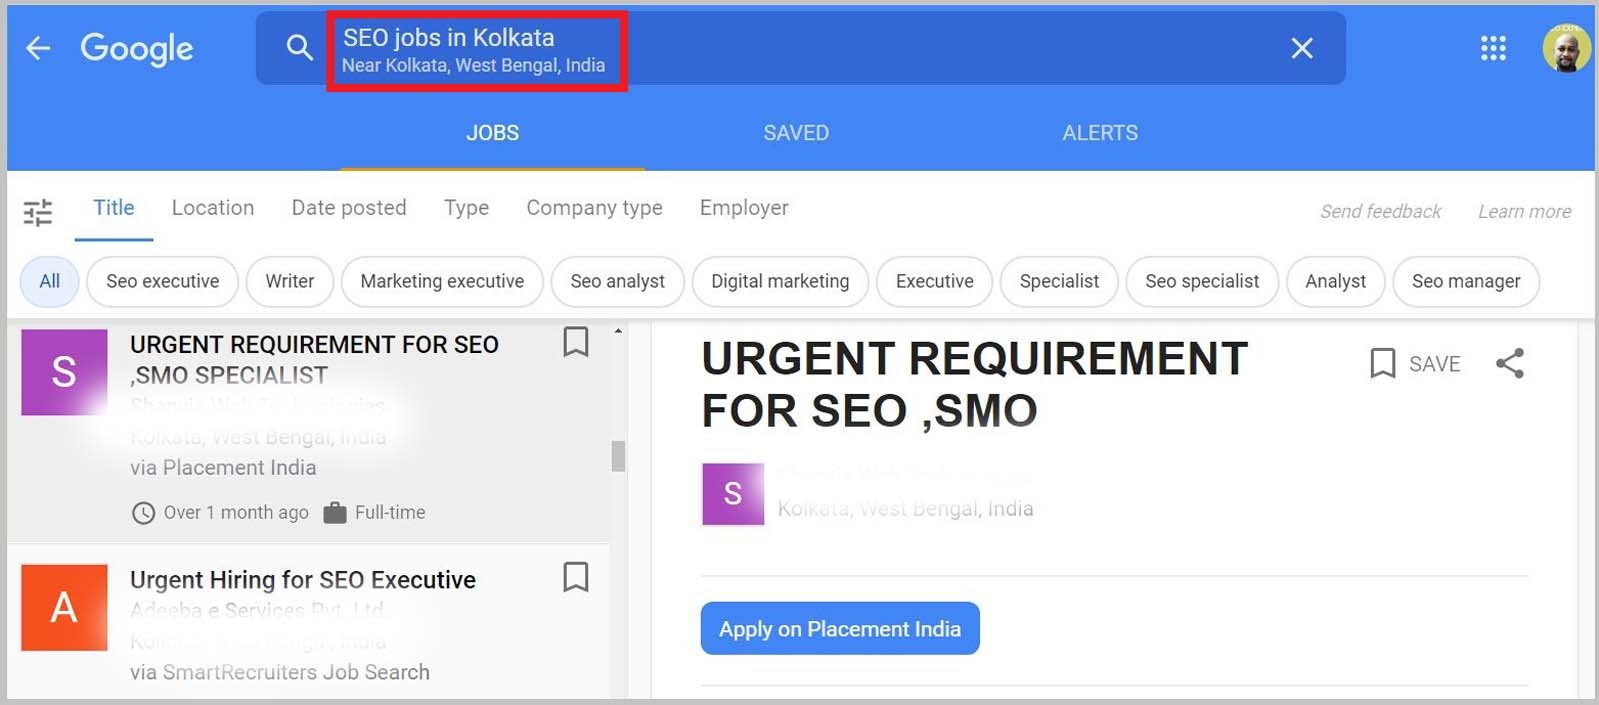 URGENT REQUIREMENT FOR SEO